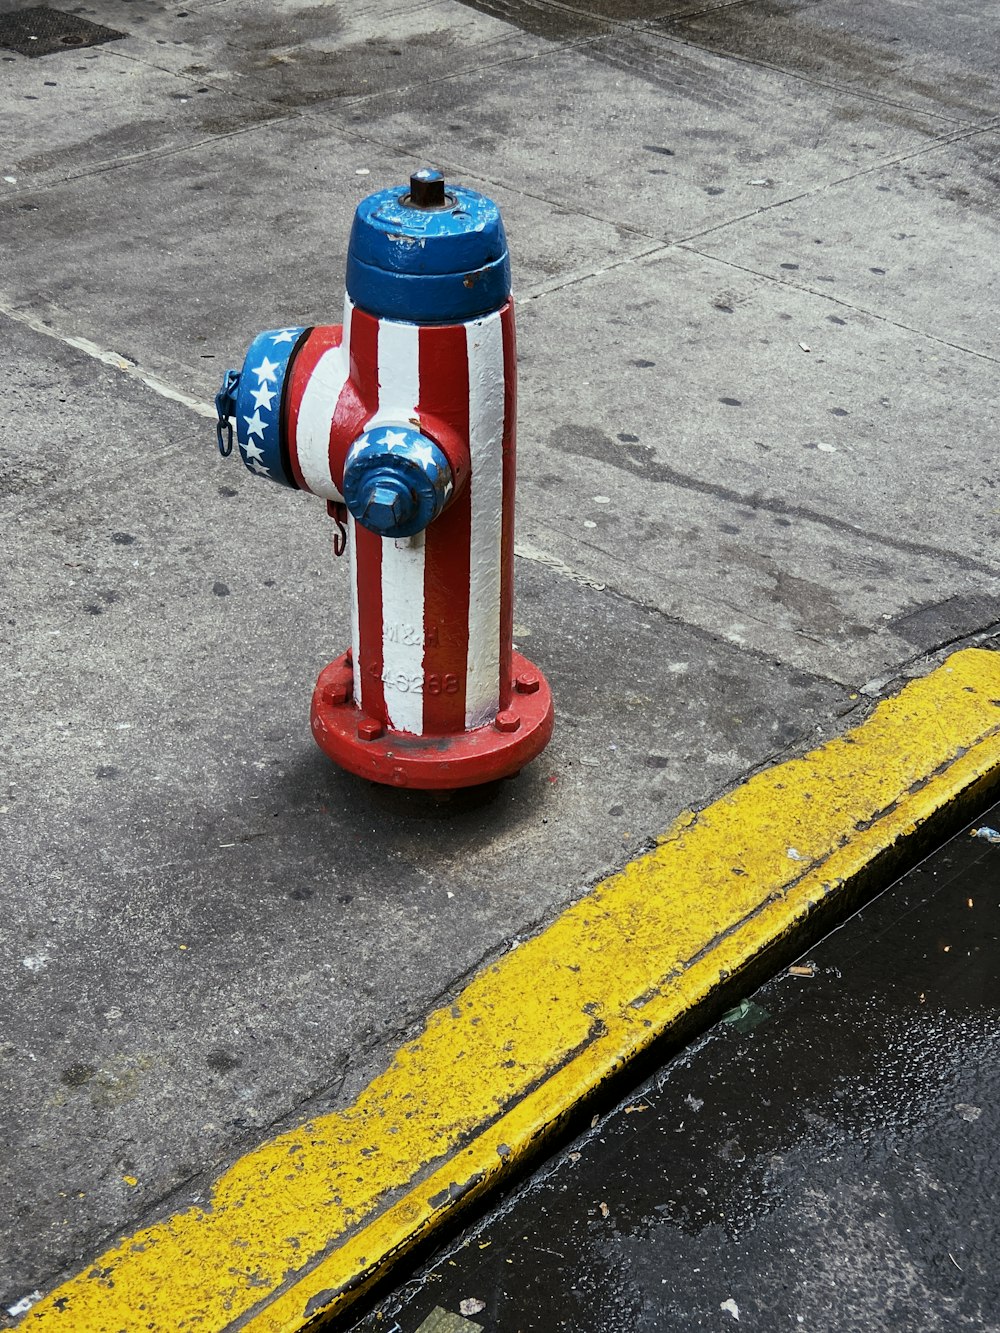 red, white, and blue fire hydrant